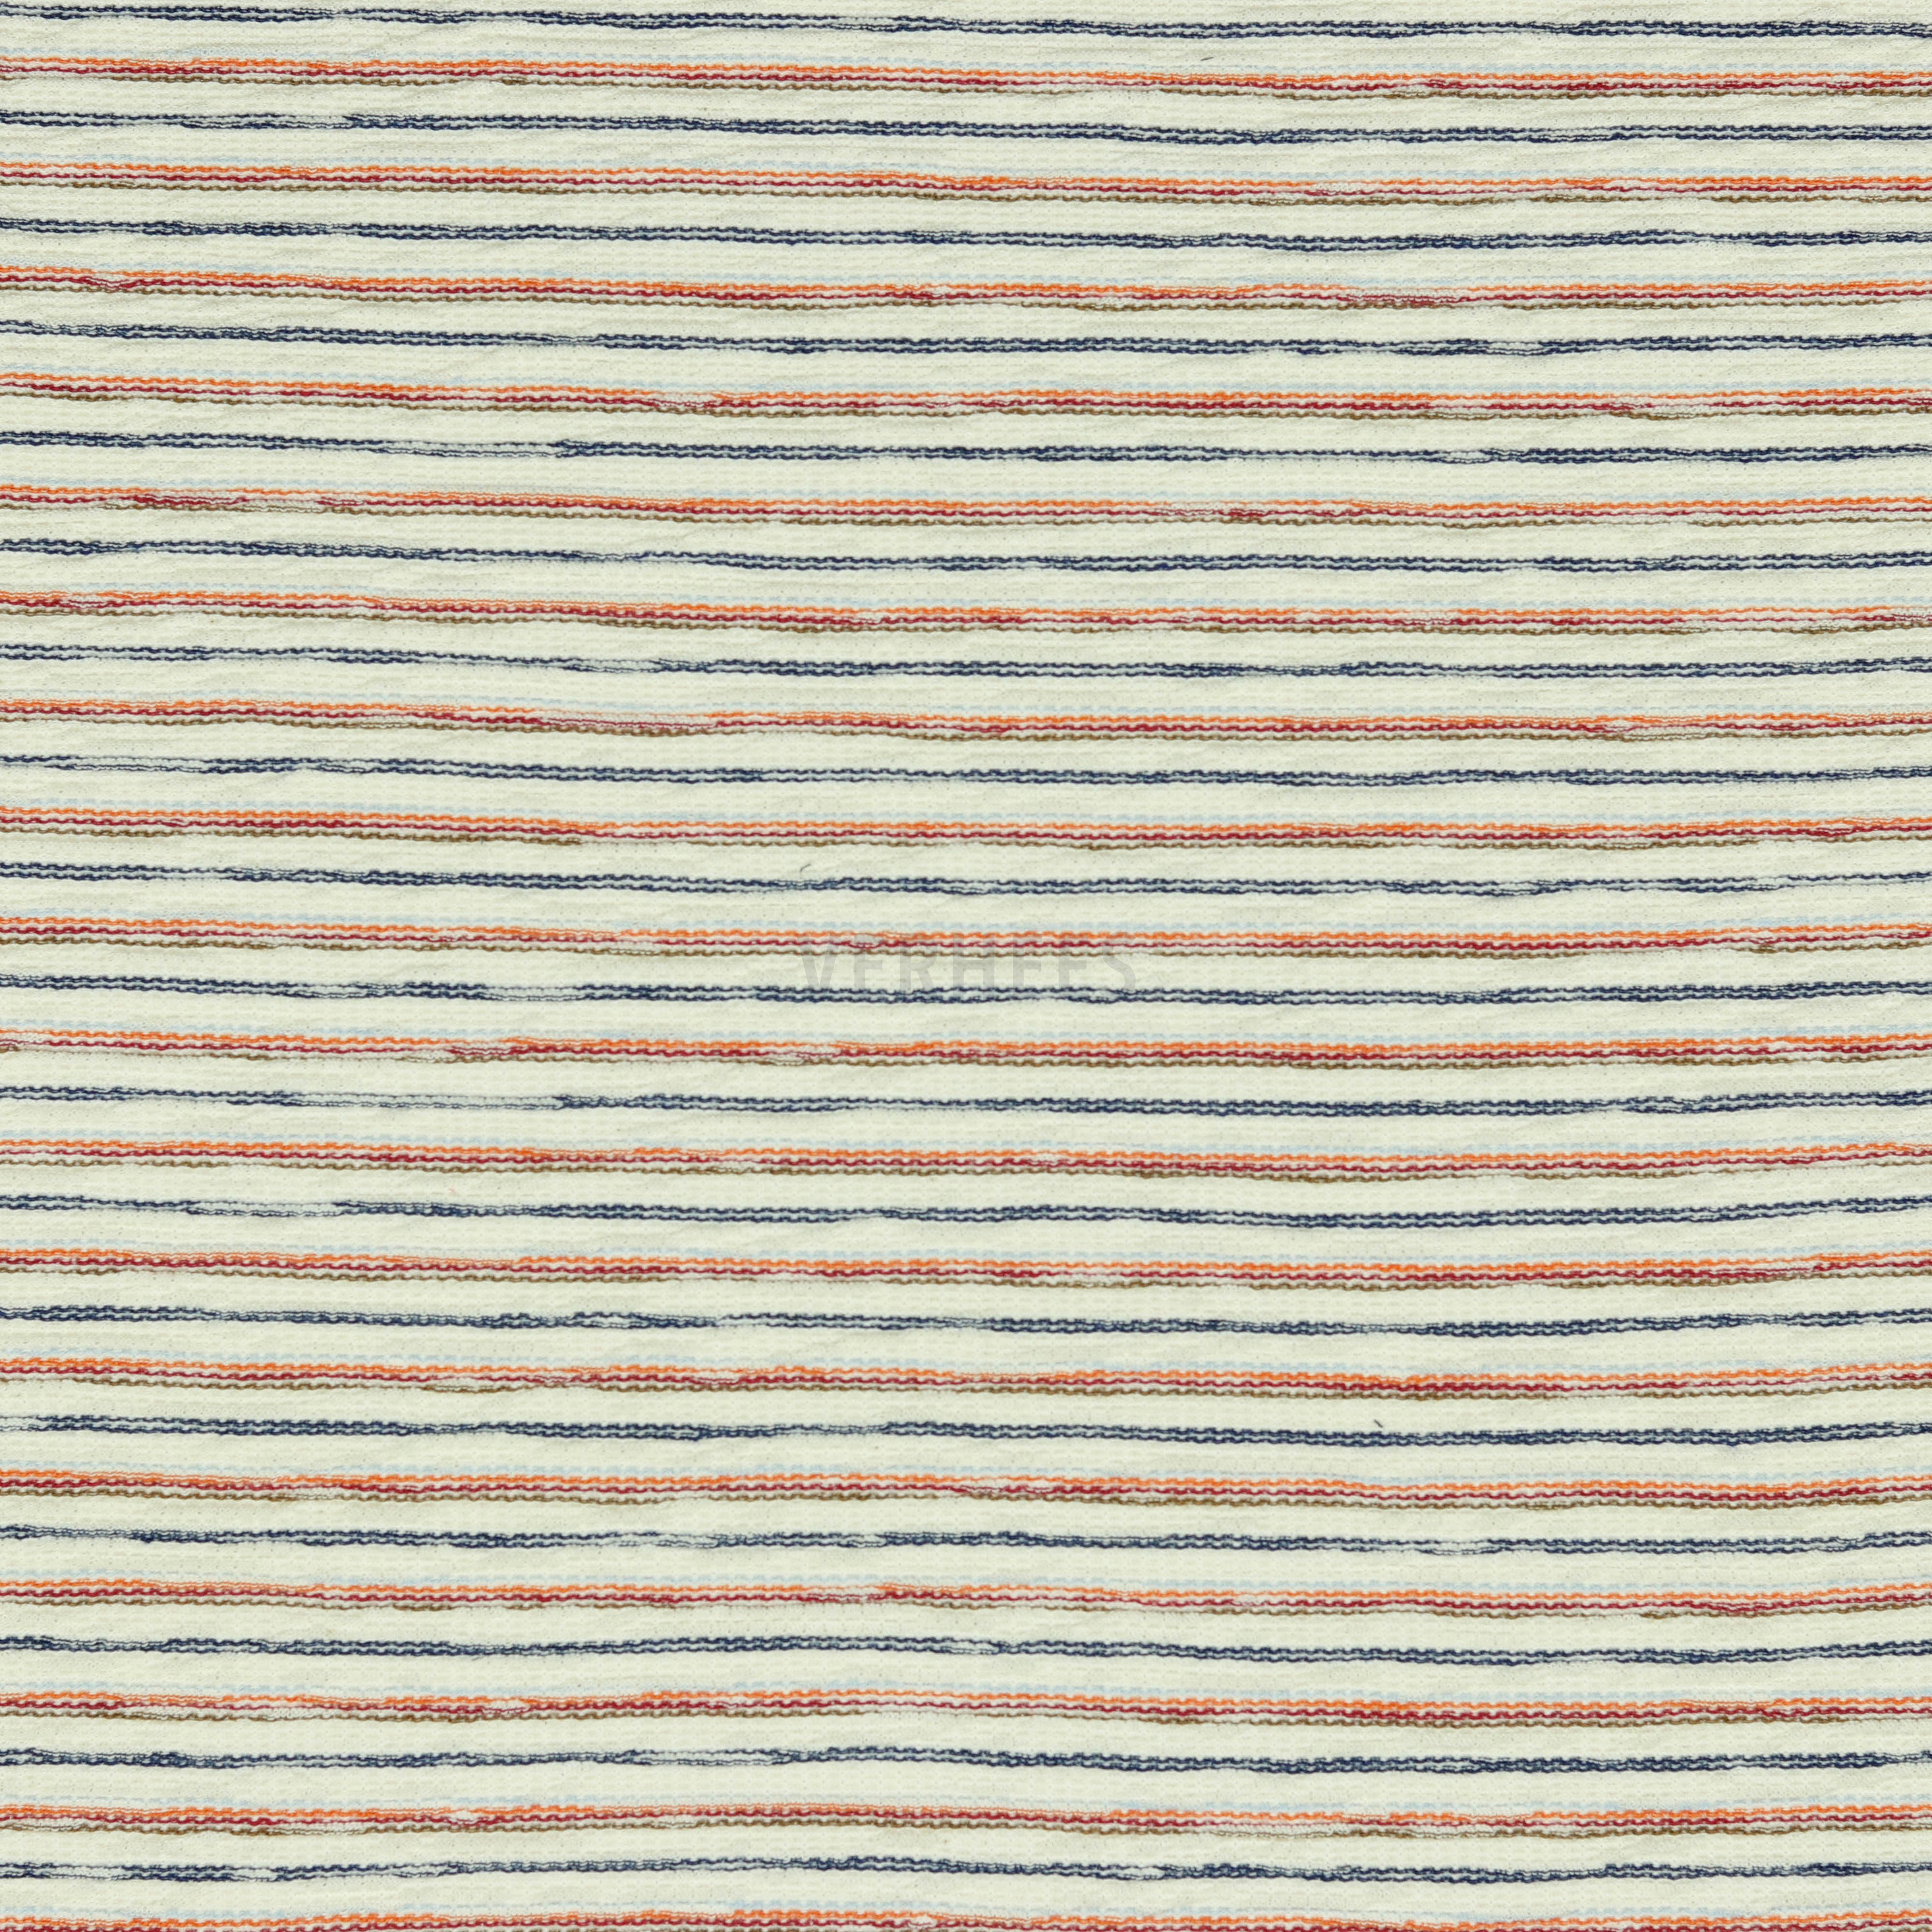 YARN DYED KNITTED STRIPE MULTICOLOUR (high resolution)